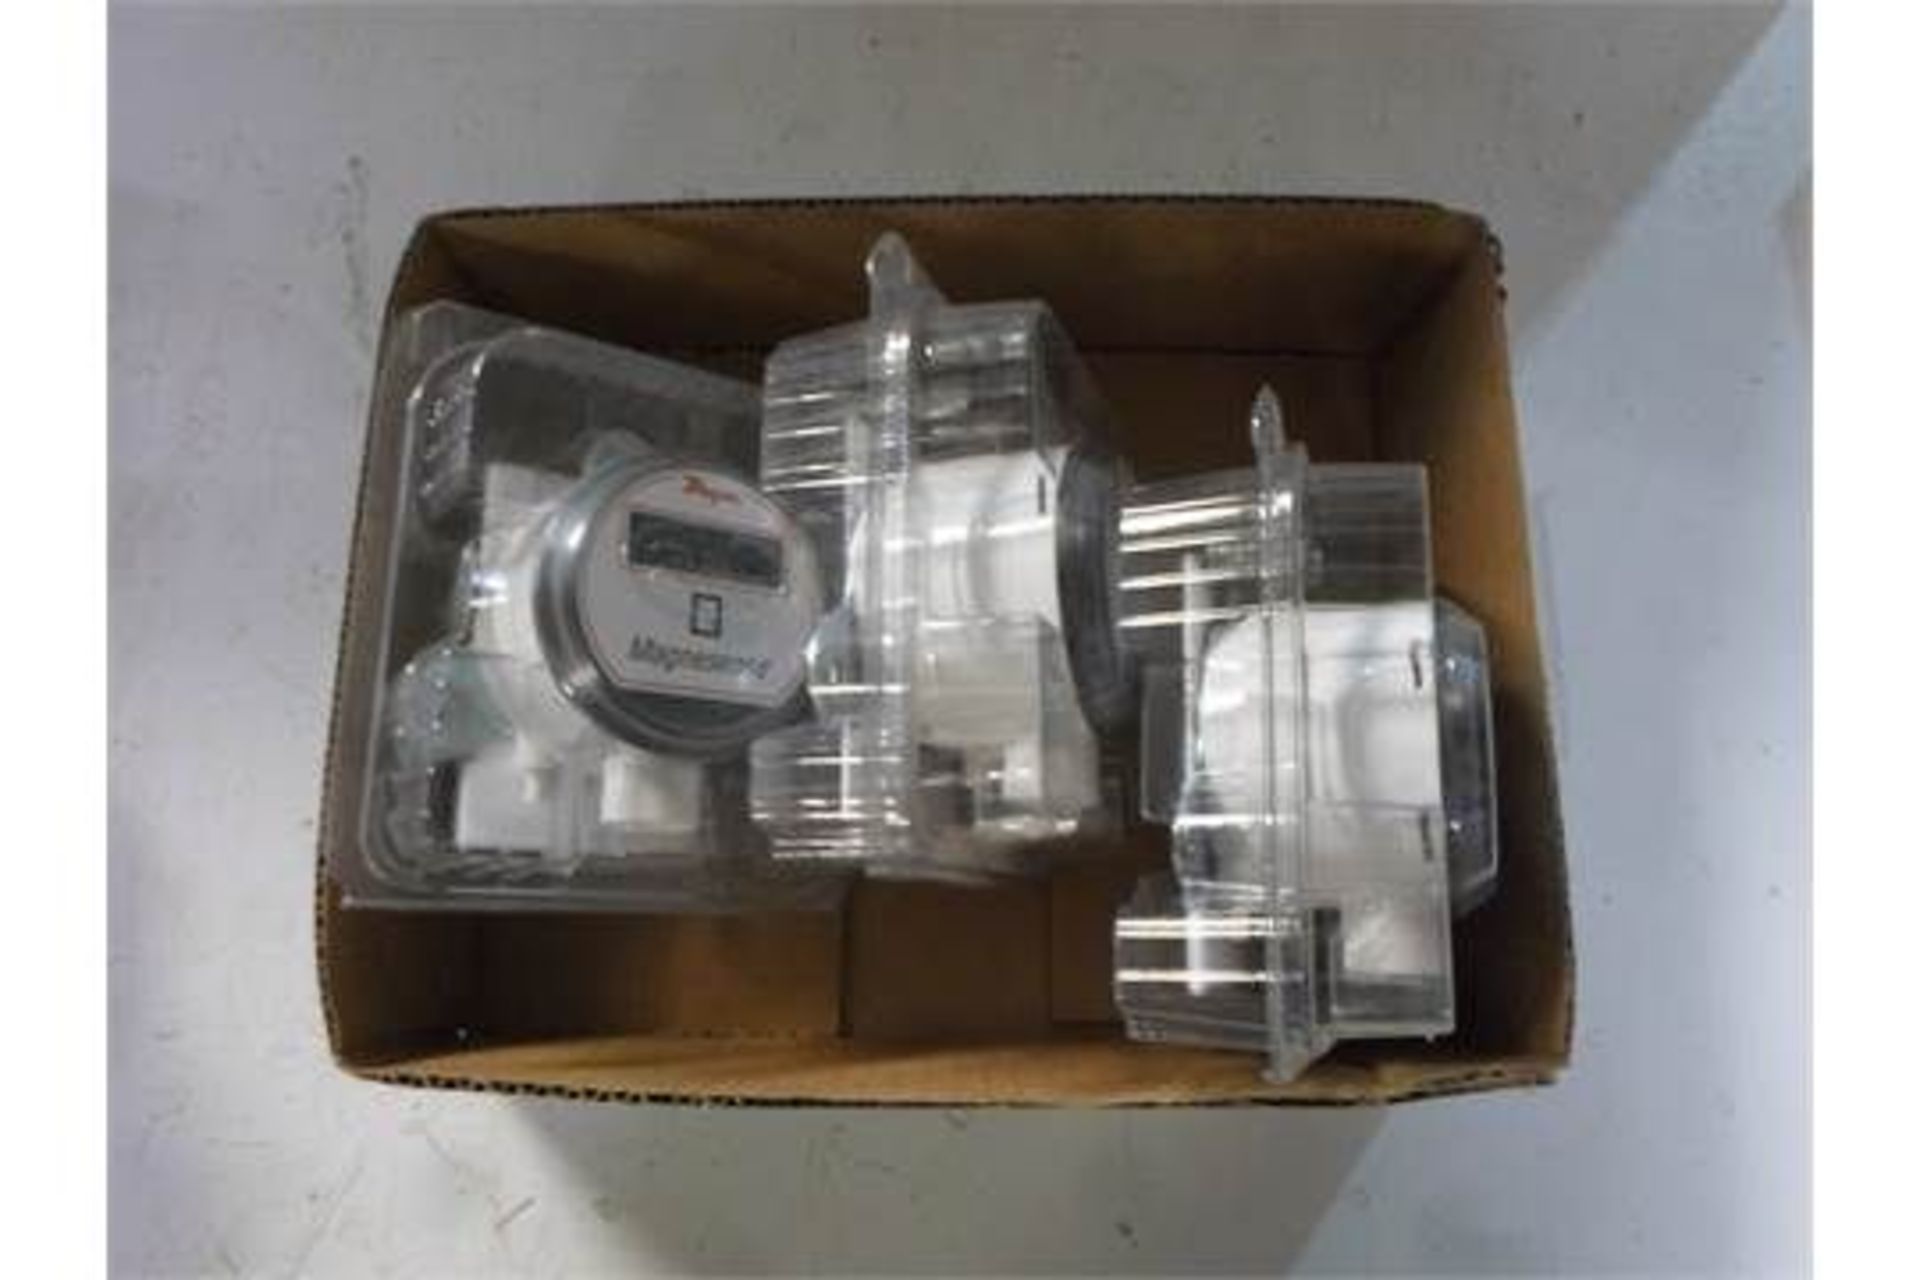 LOT OF 3 Dwyer MS-141 Magnesense Differential Pressure Transmitter